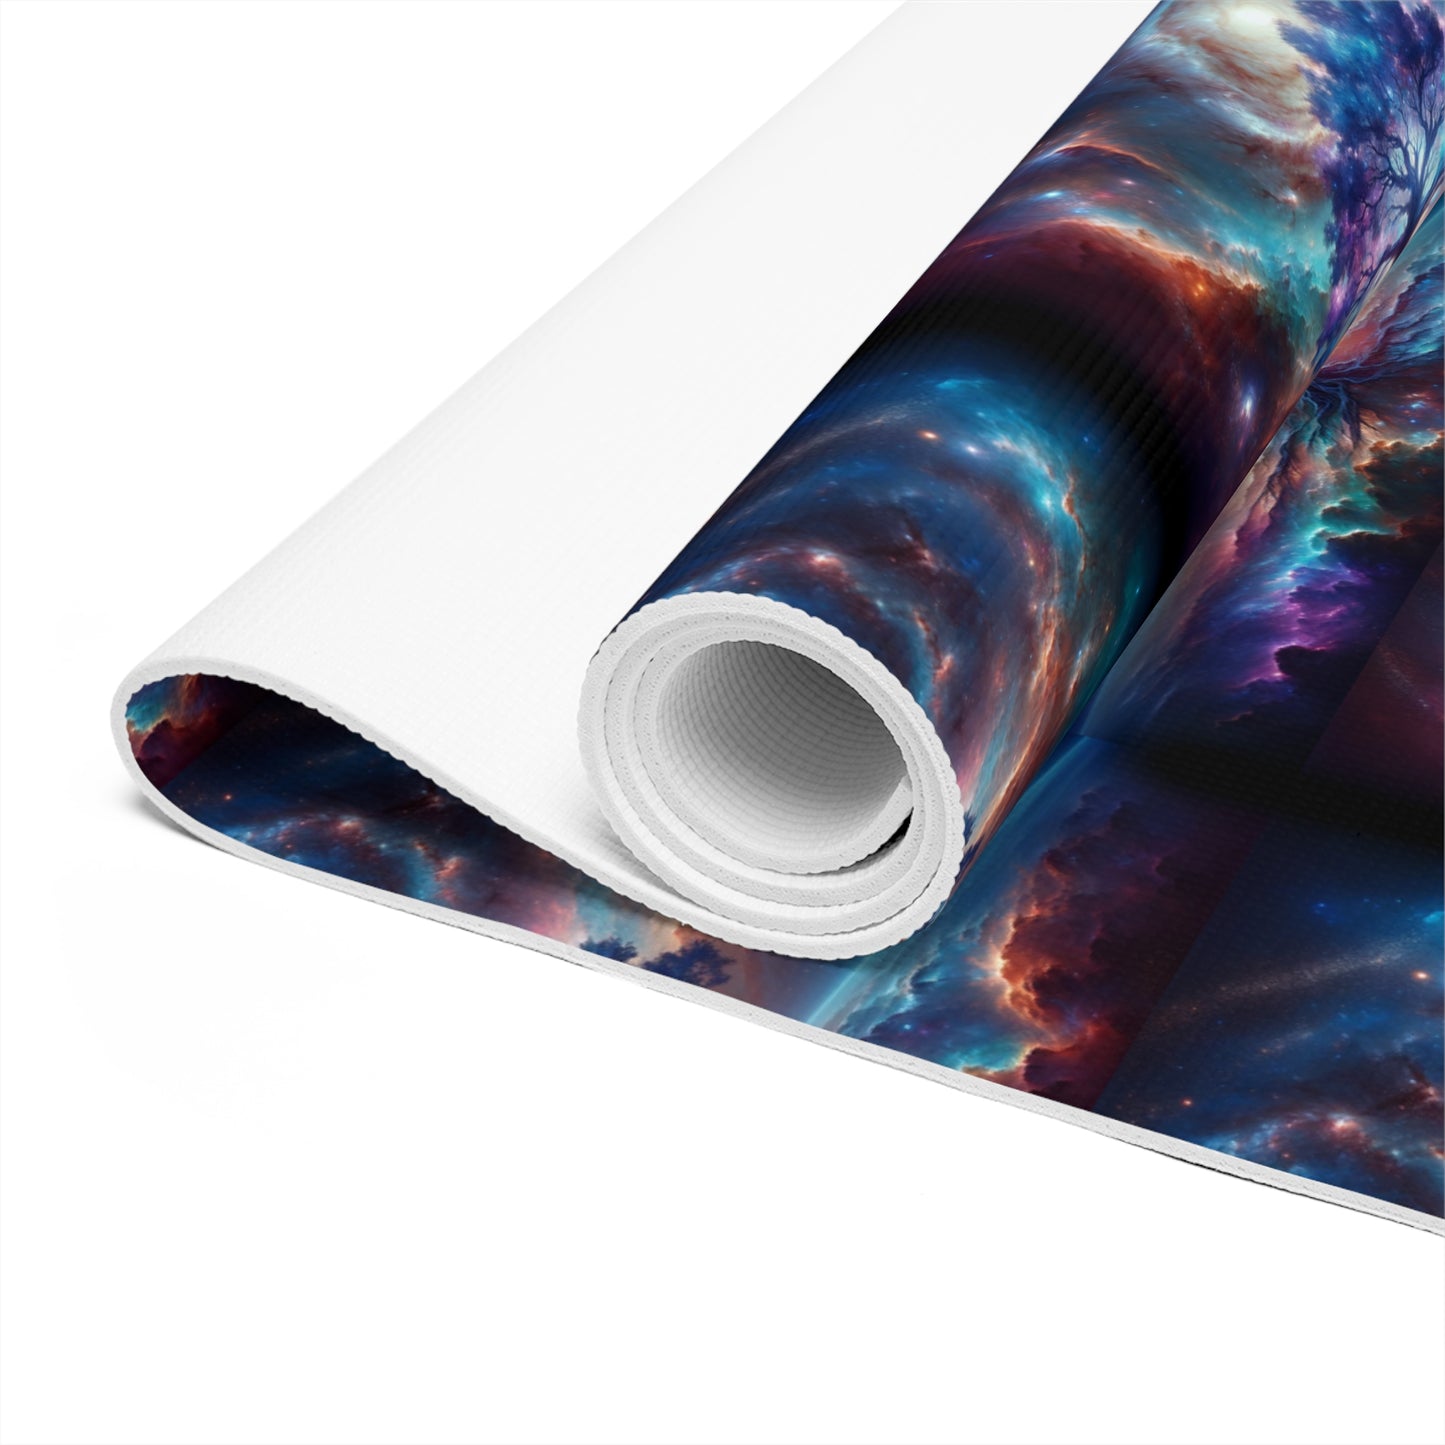 -Discover Ultimate Comfort with Our Prenium Foam Yoga Mat Tree of Life design